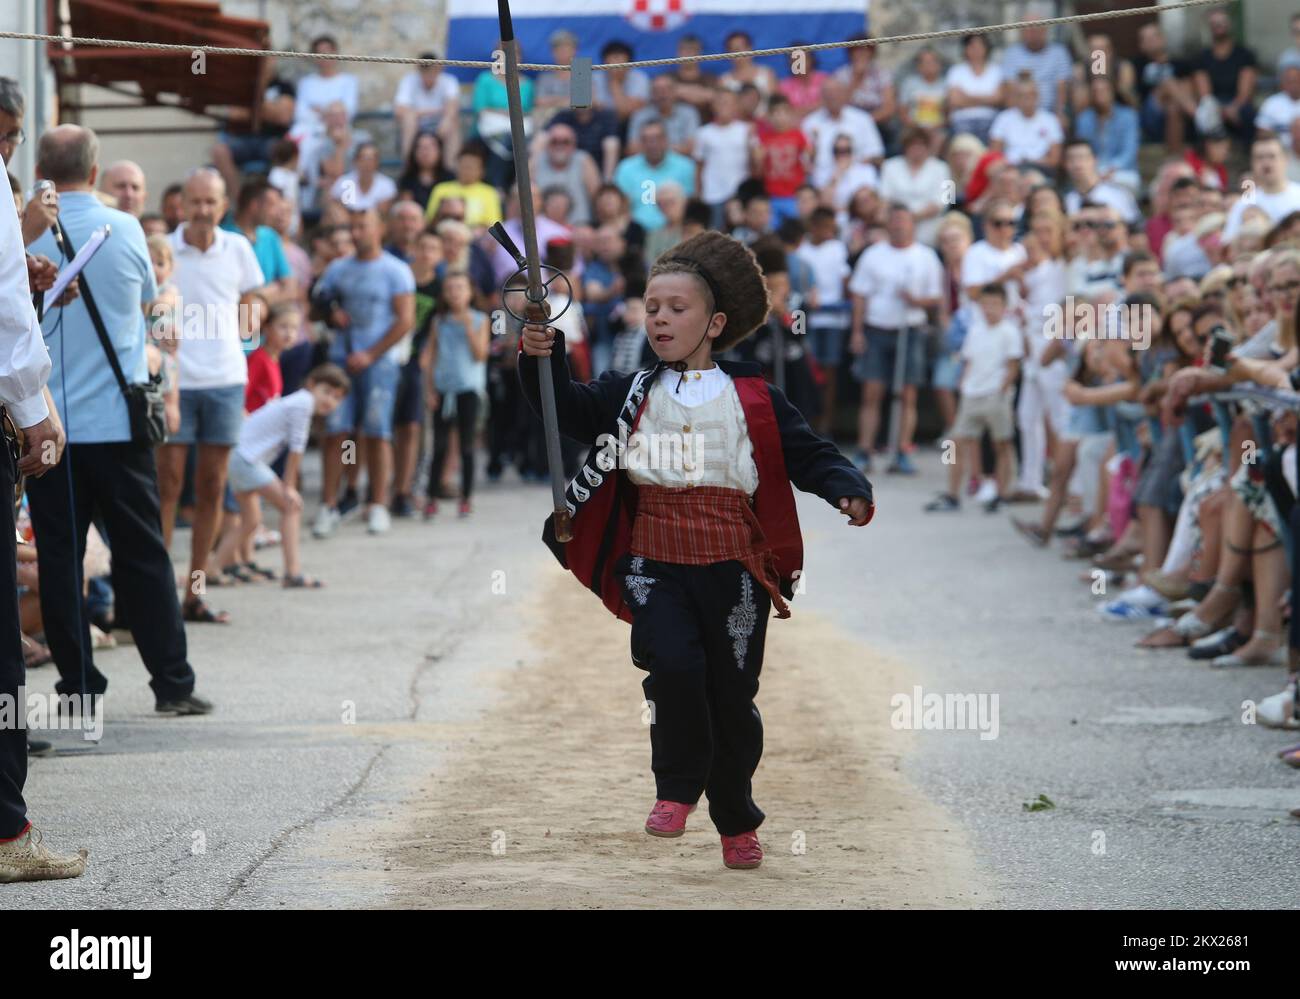 20.08.2017., Brnaze, Croatia - Alkar Vito Vuckovic runs during the Children's Alka tournament in Vuckovici village, Croatia, August 20, 2017. Children's Alka is a tournament which has been held every August in the Croatian village of Vuckovici since 1955. in memory of their ancestors Father Pavao, Boze, Tadija and Zec, whose heroism and bravery made them become prominent in the decisive battle against the Ottomans in 1715. Only boys up to 10 years can participate. Photo: Ivo Cagalj/PIXSELL Stock Photo